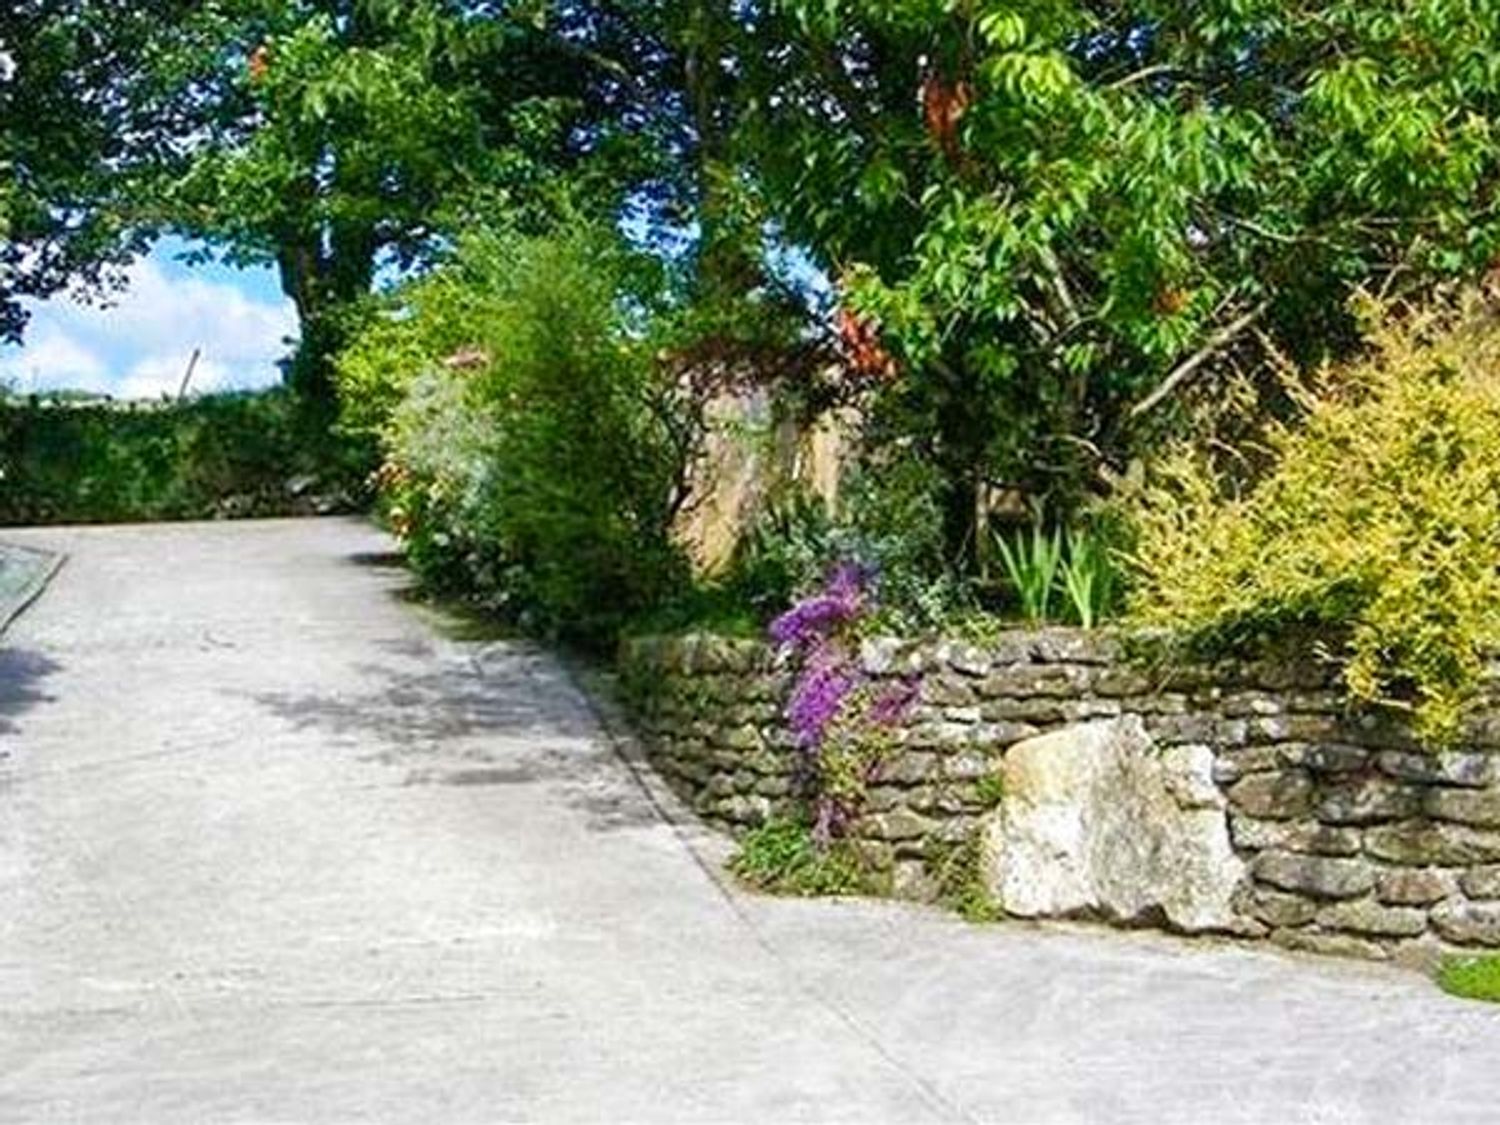 Goose Cottage, Cornwall